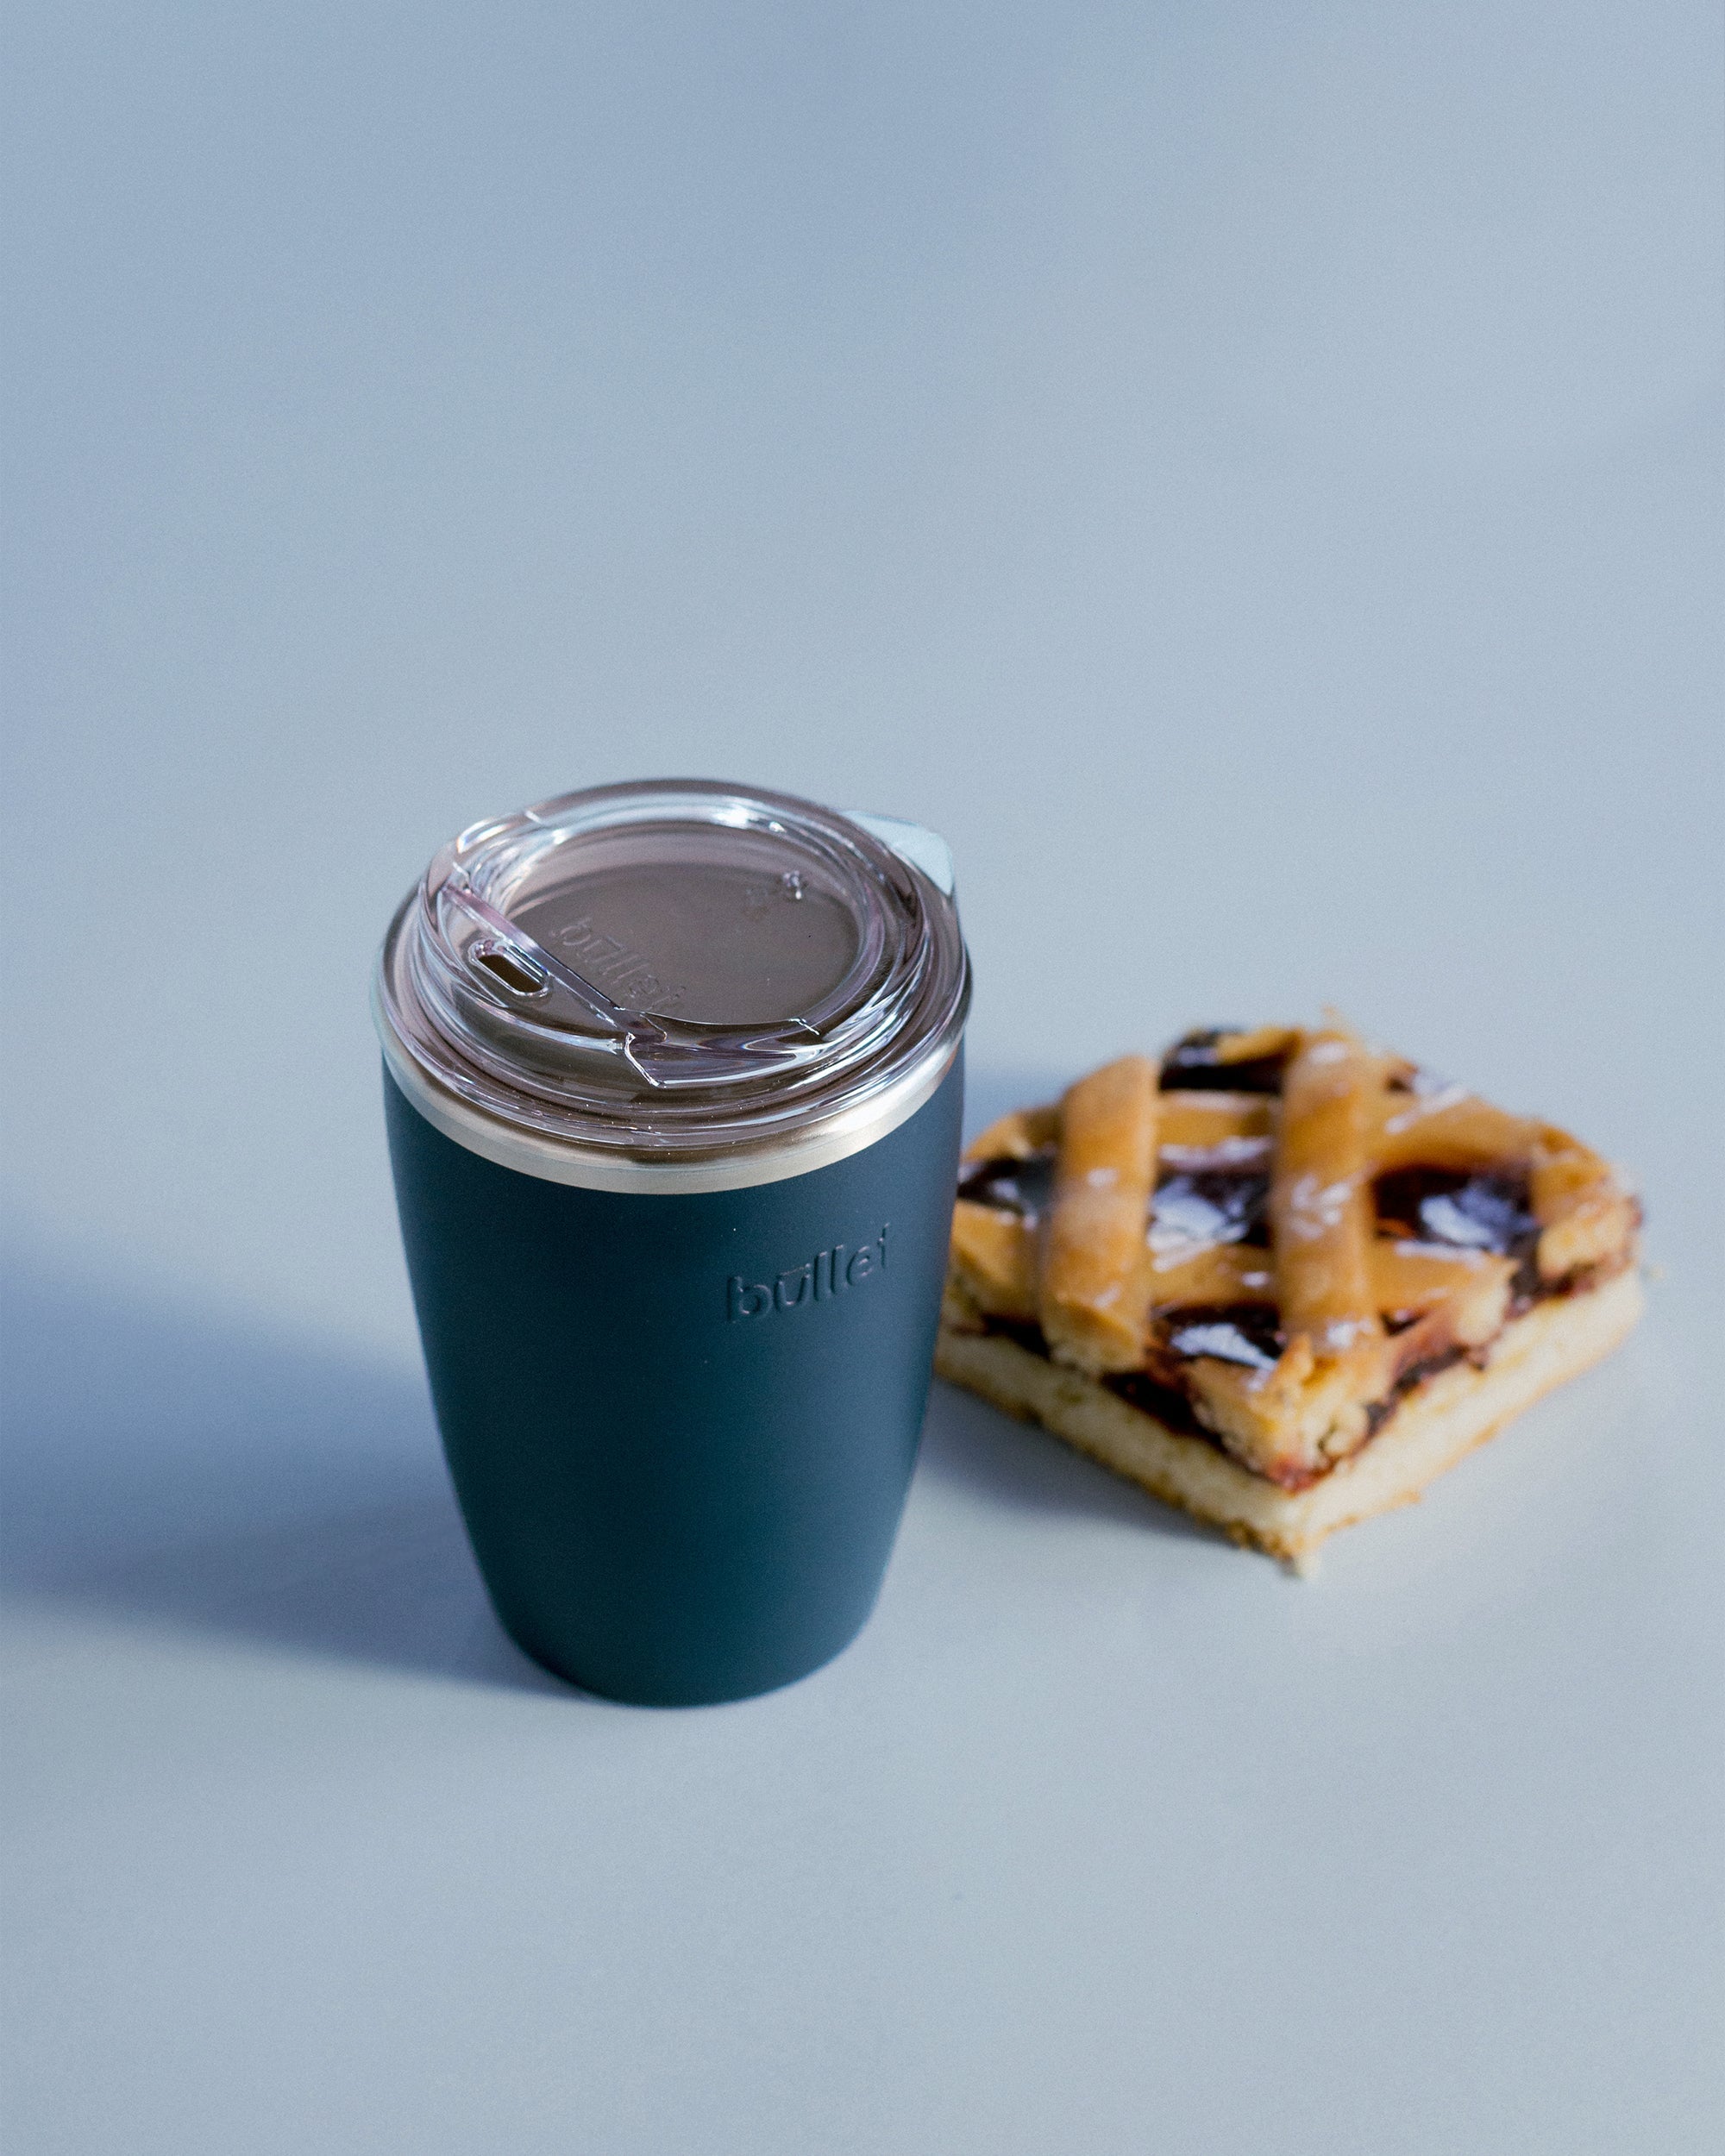 8oz blue reusable coffee cup next to blueberry slice